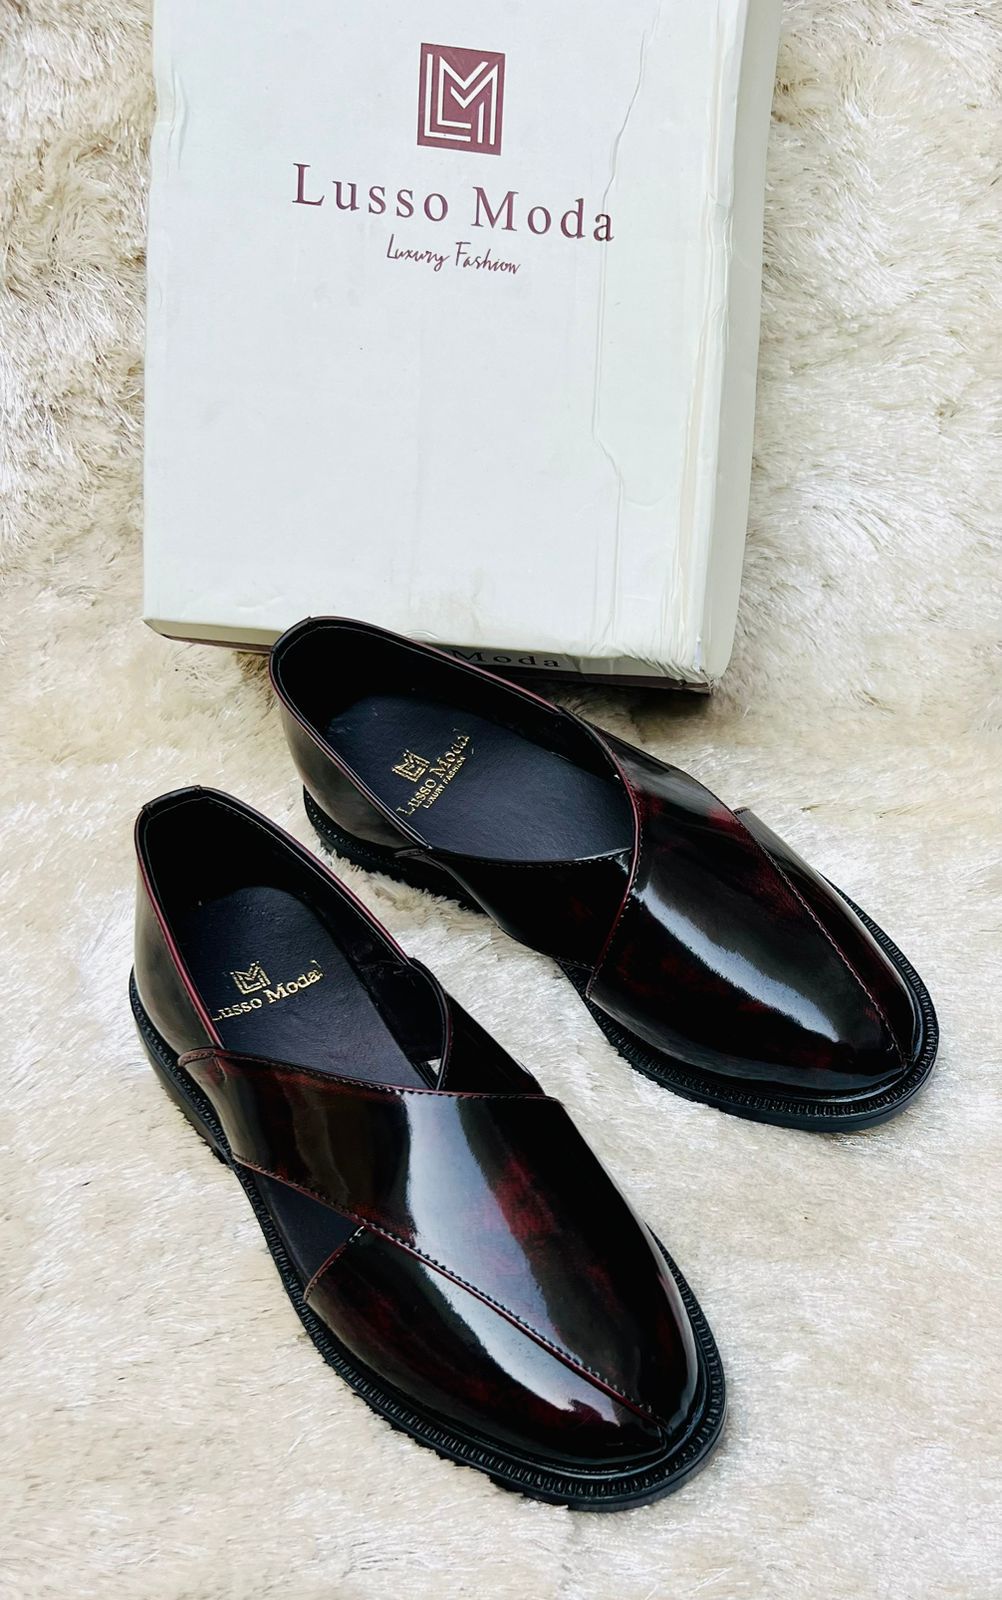 Lusso Moda Shoes With Brand Box